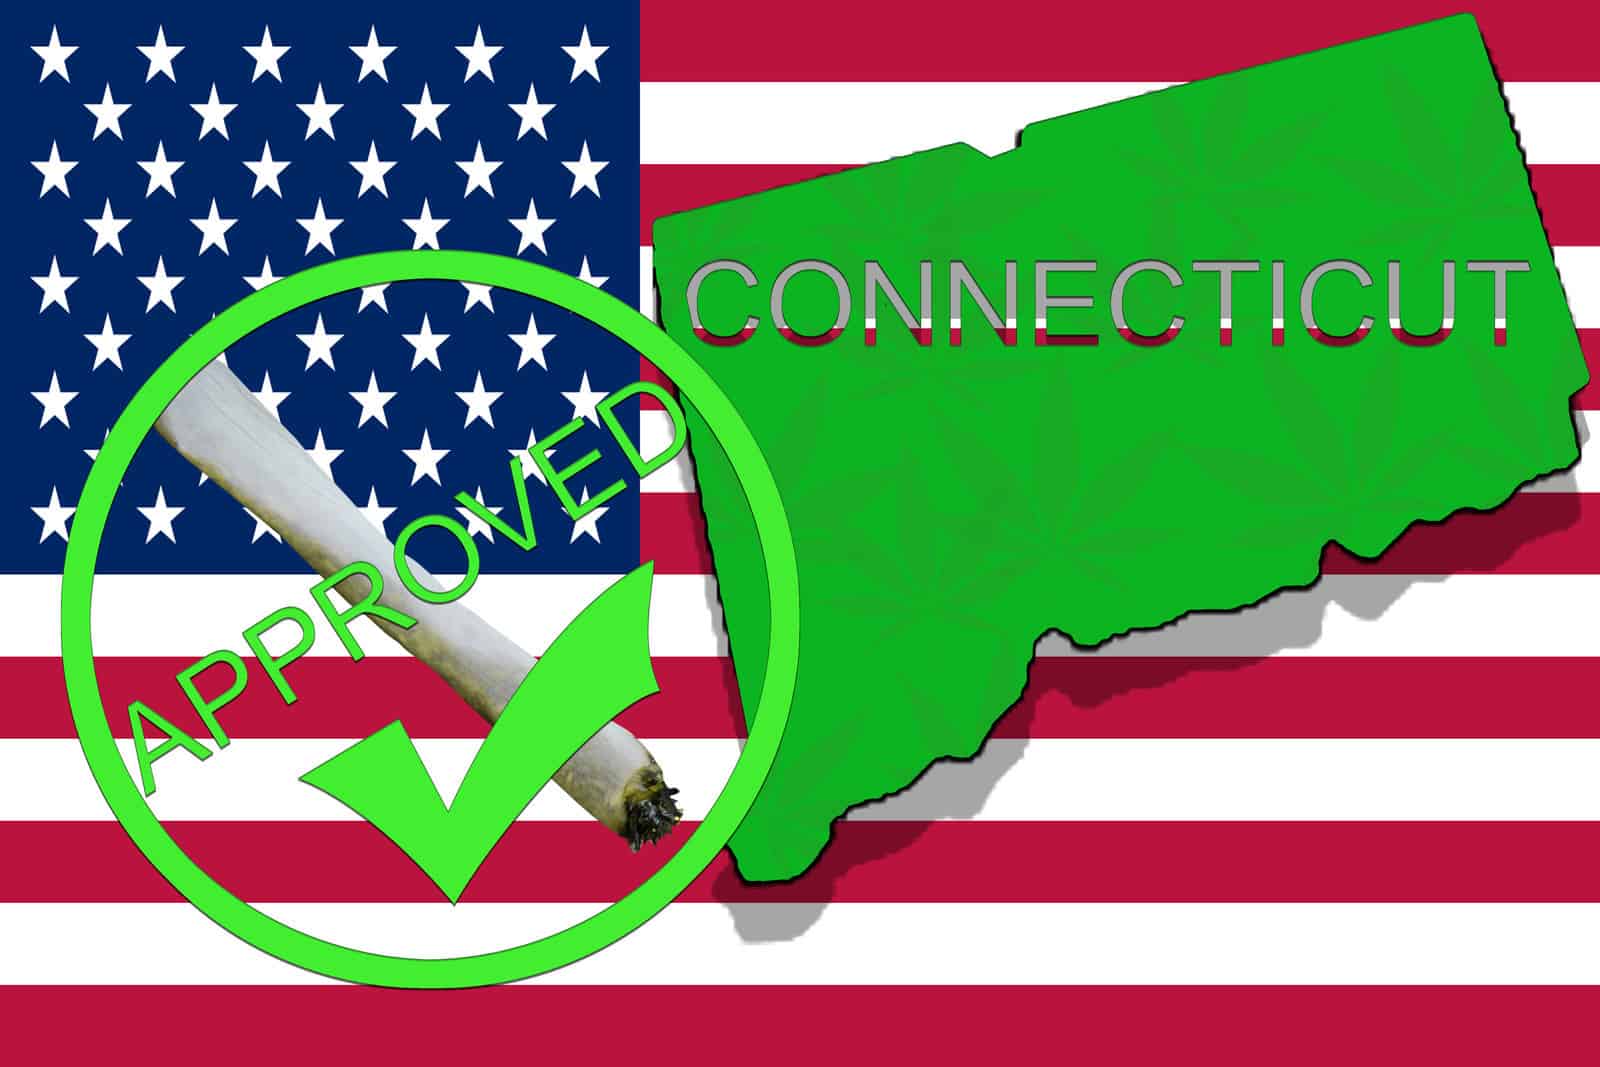 It’s Official! Connecticut Has Legalized Adult-Use Cannabis